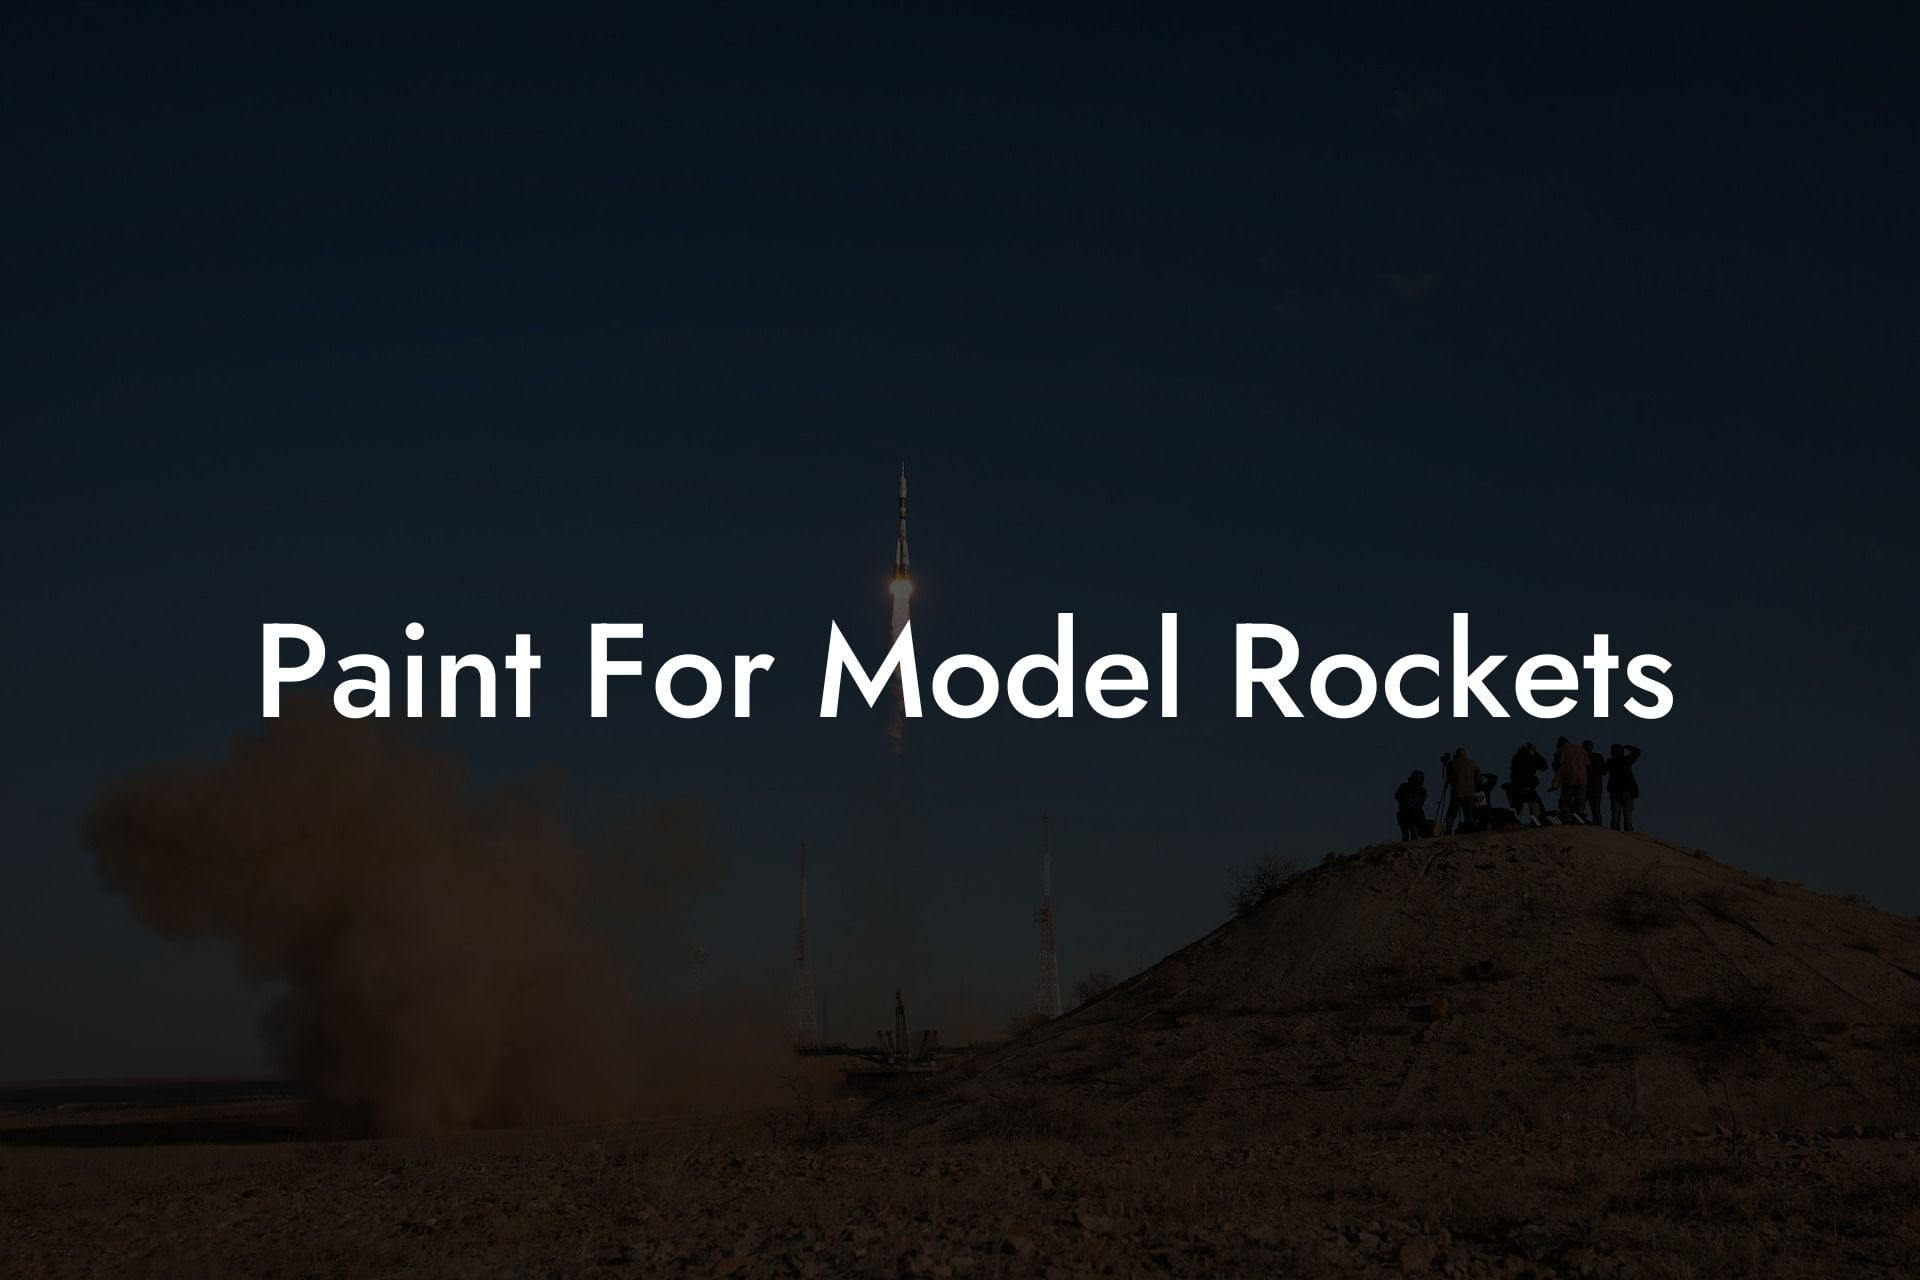 Paint For Model Rockets